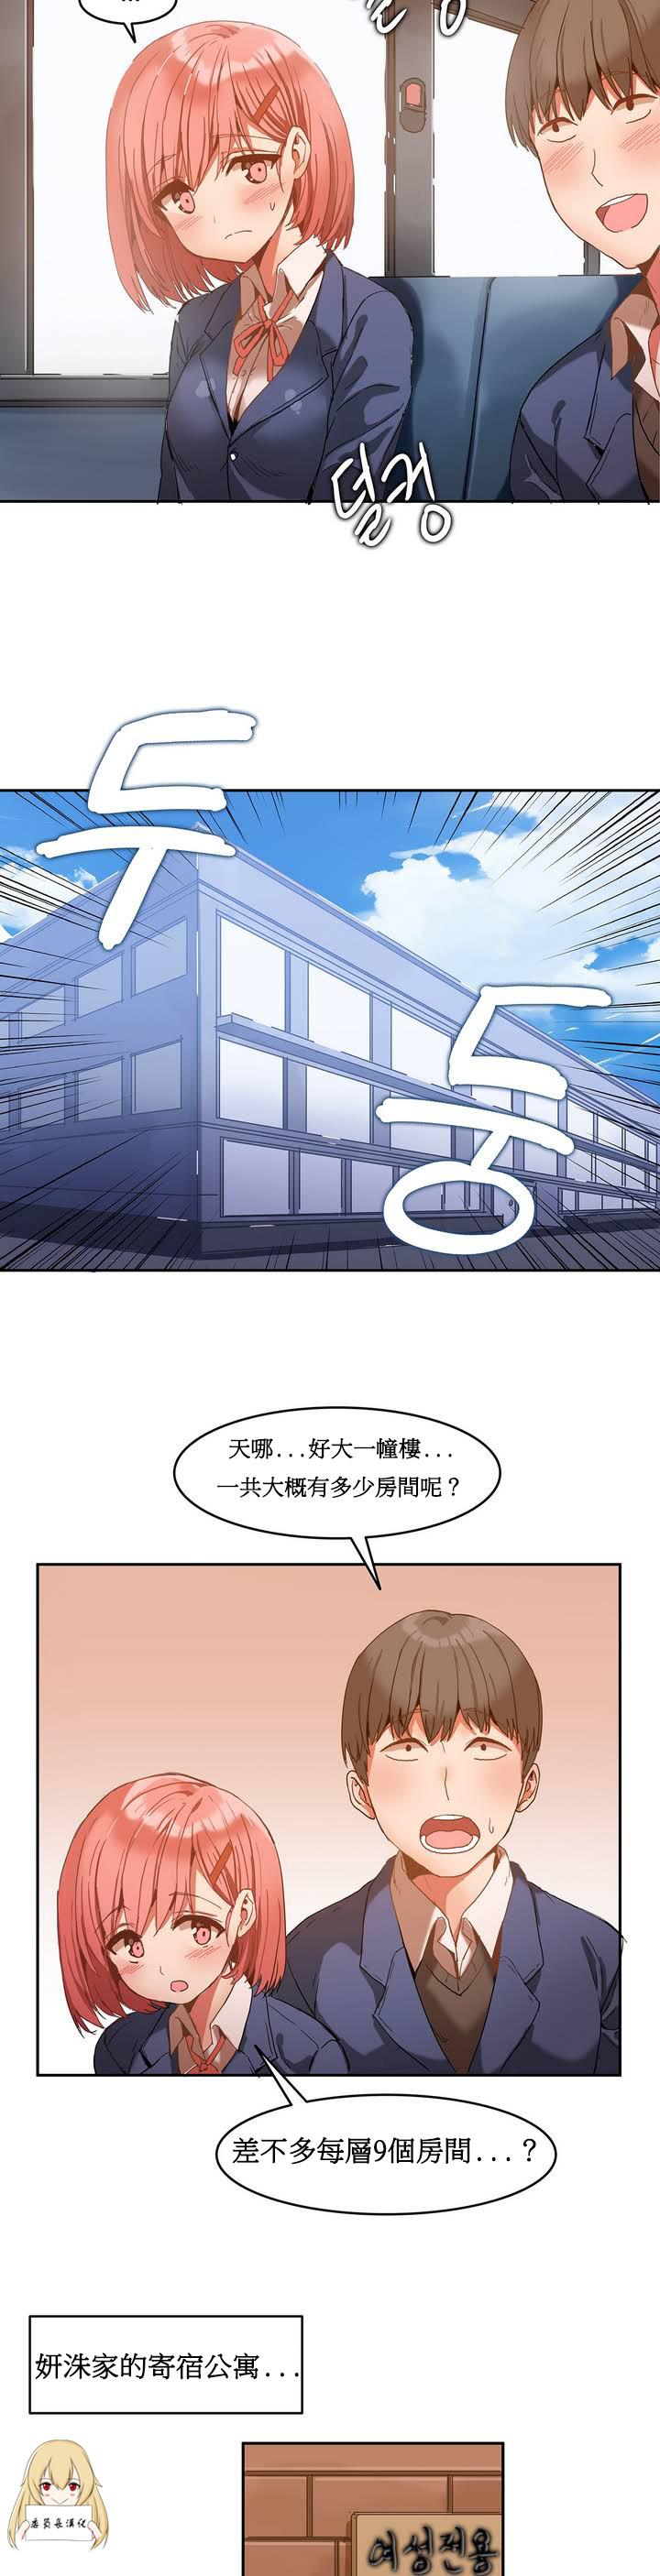 Amatuer Hahri's Lumpy Boardhouse Ch. 1~14【委員長個人漢化】（持續更新） Wild Amateurs - Page 11